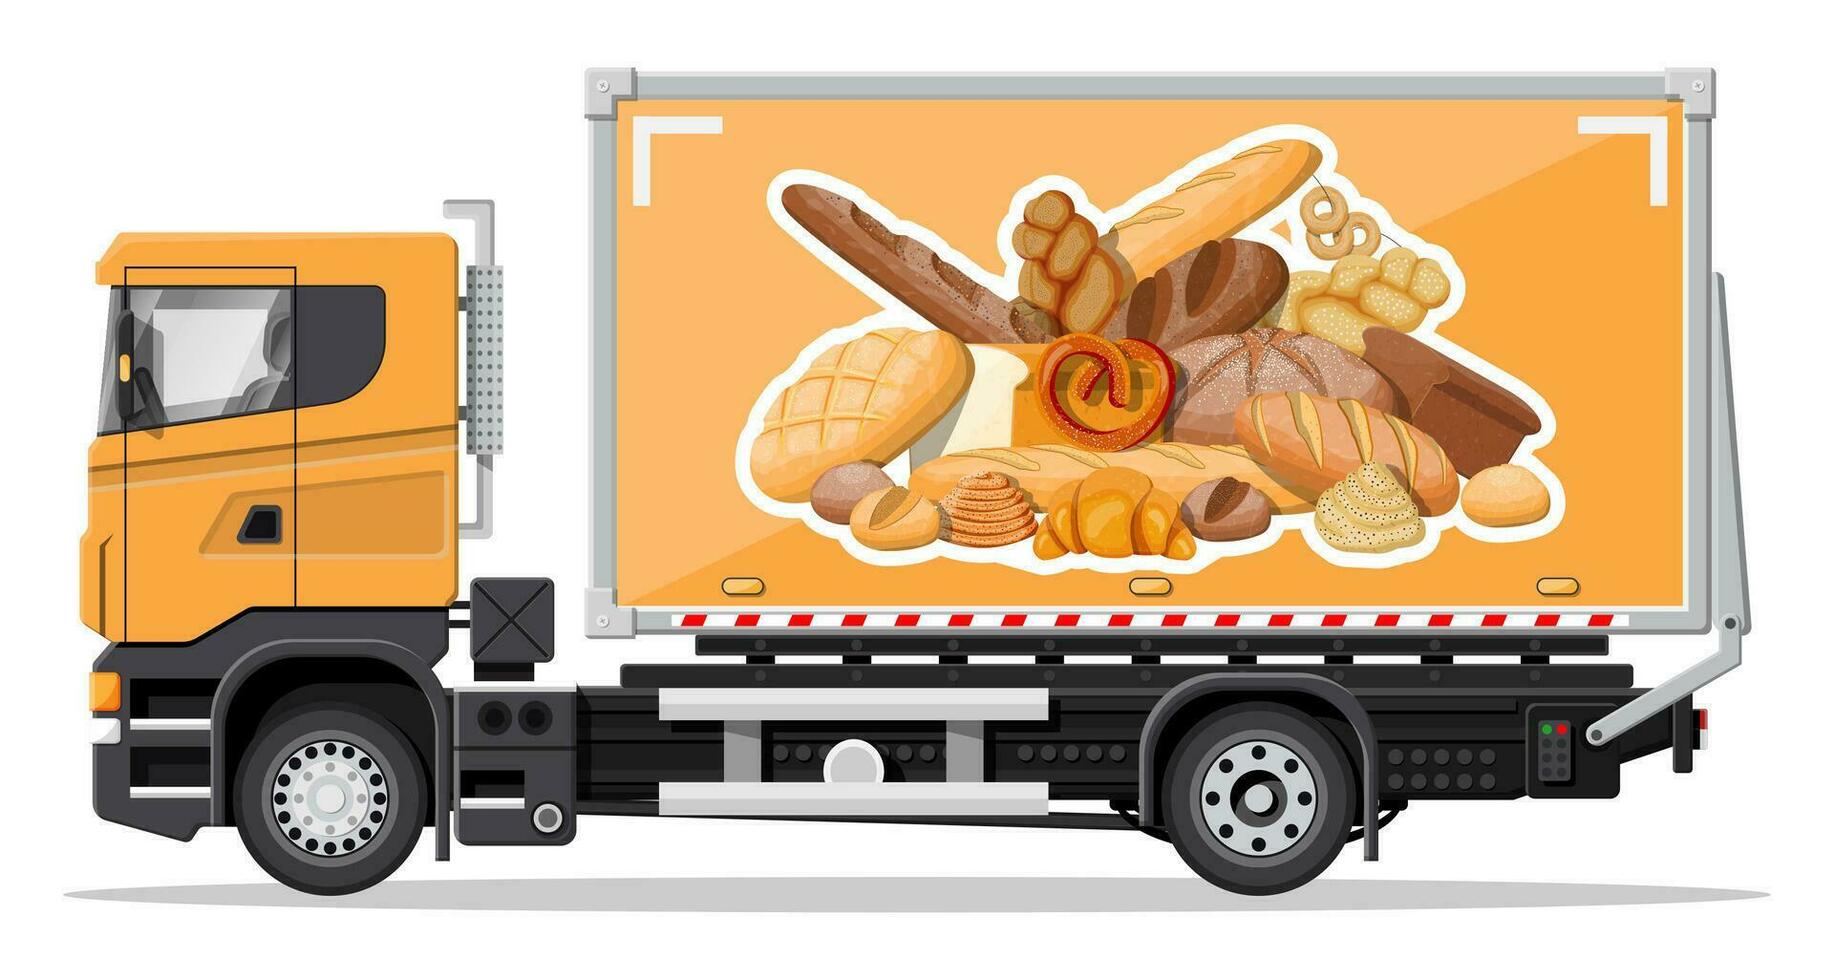 Truck car full of bread products. Shop and farm delivering service. Delivery and selling bread and grocery products concept. Loaf, baguette, rye. Cargo and logistic. Cartoon flat vector illustration